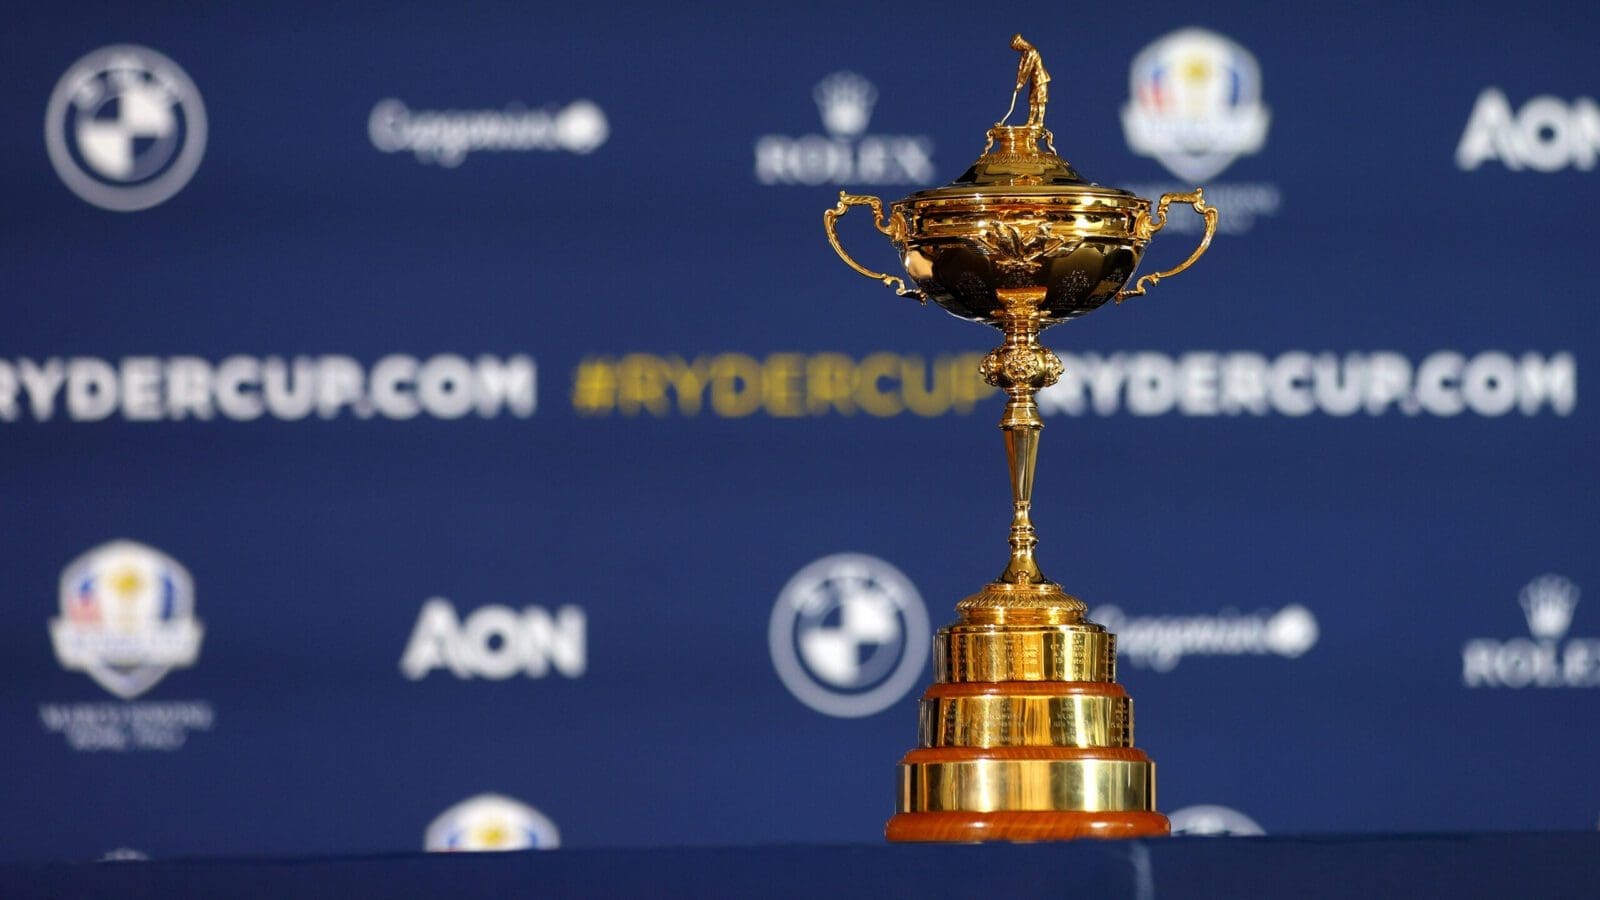 ryder cup trophy scaled